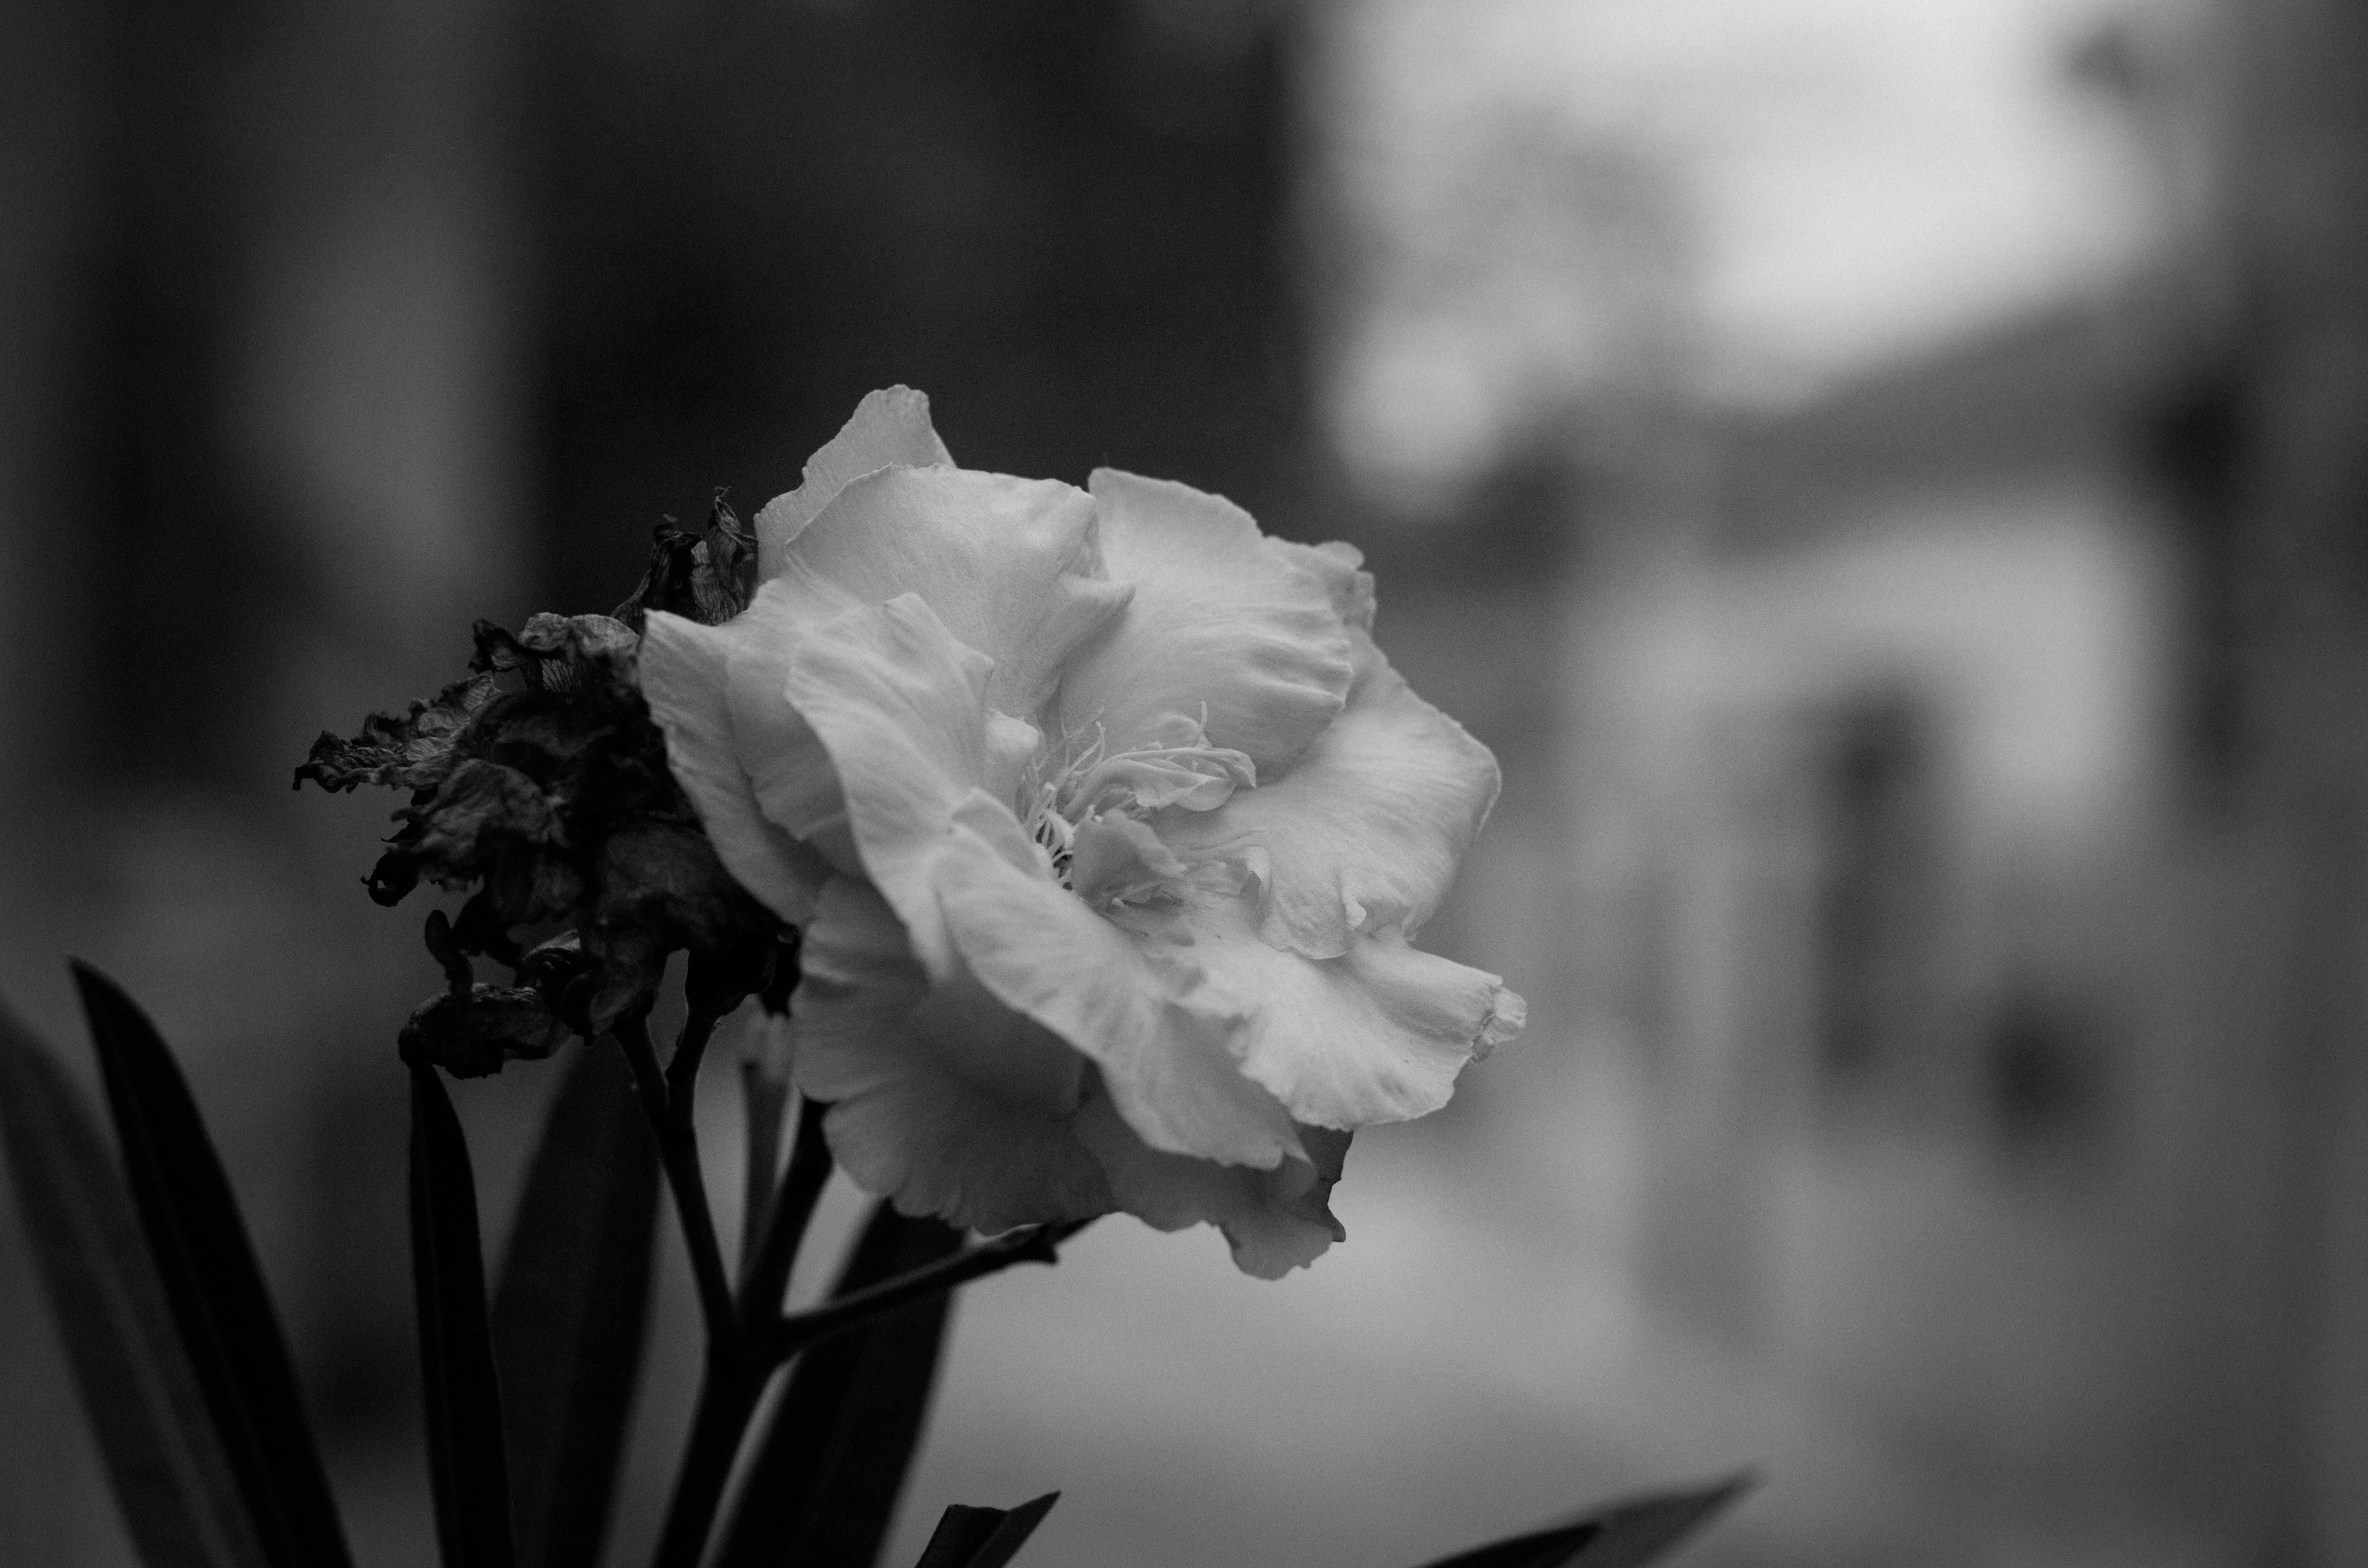 General 4928x3264 flowers monochrome photography plants closeup leaves blurry background blurred